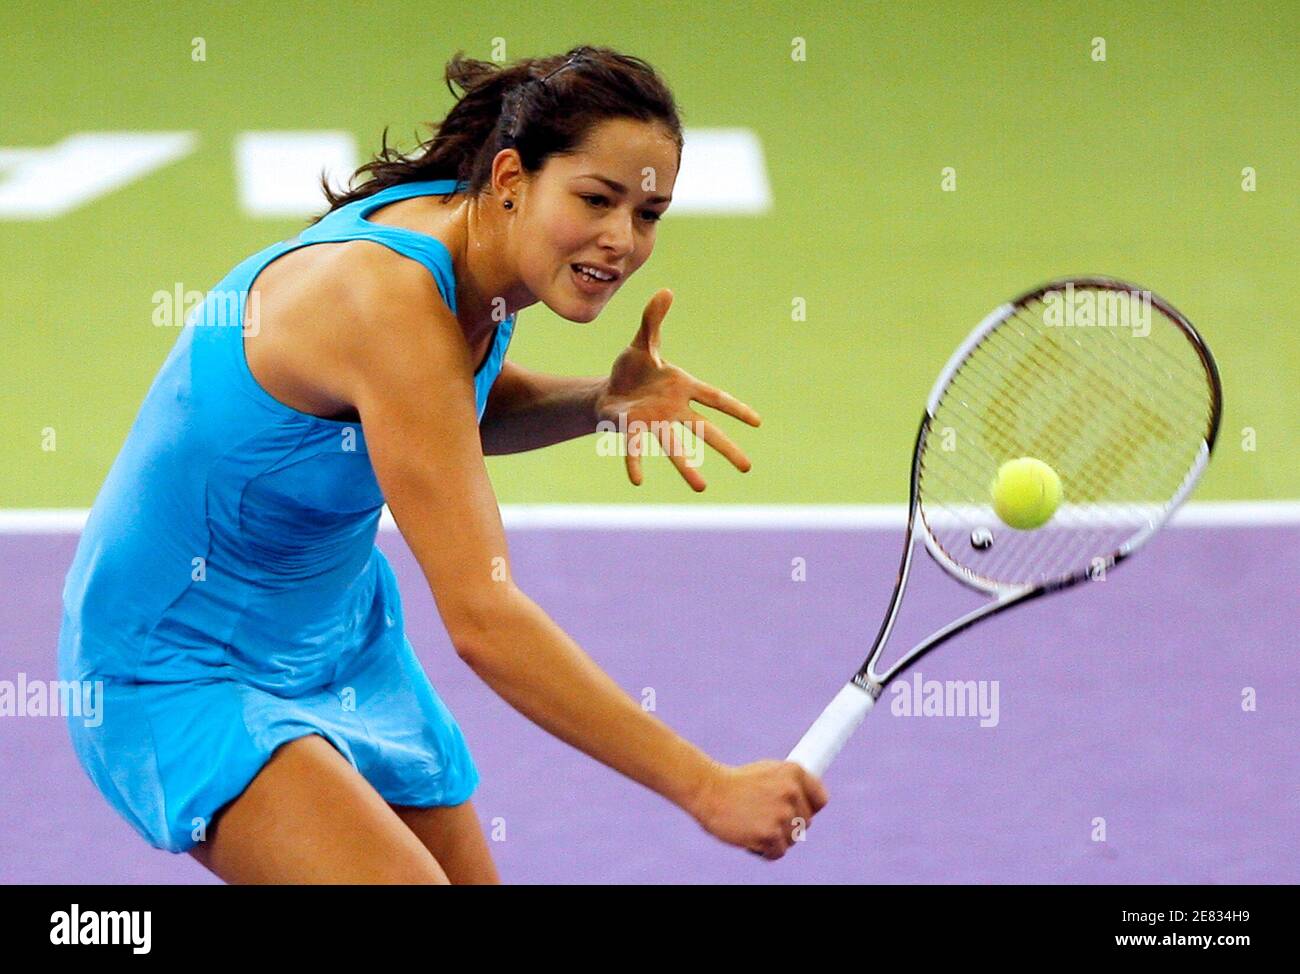 Ana Ivanovic of Serbia returns a backhand to Justine Henin of Belgium  during her semi-final match at the WTA Championships tennis tournament in  Madrid November 10, 2007. REUTERS/Sergio Perez (SPAIN Stock Photo -